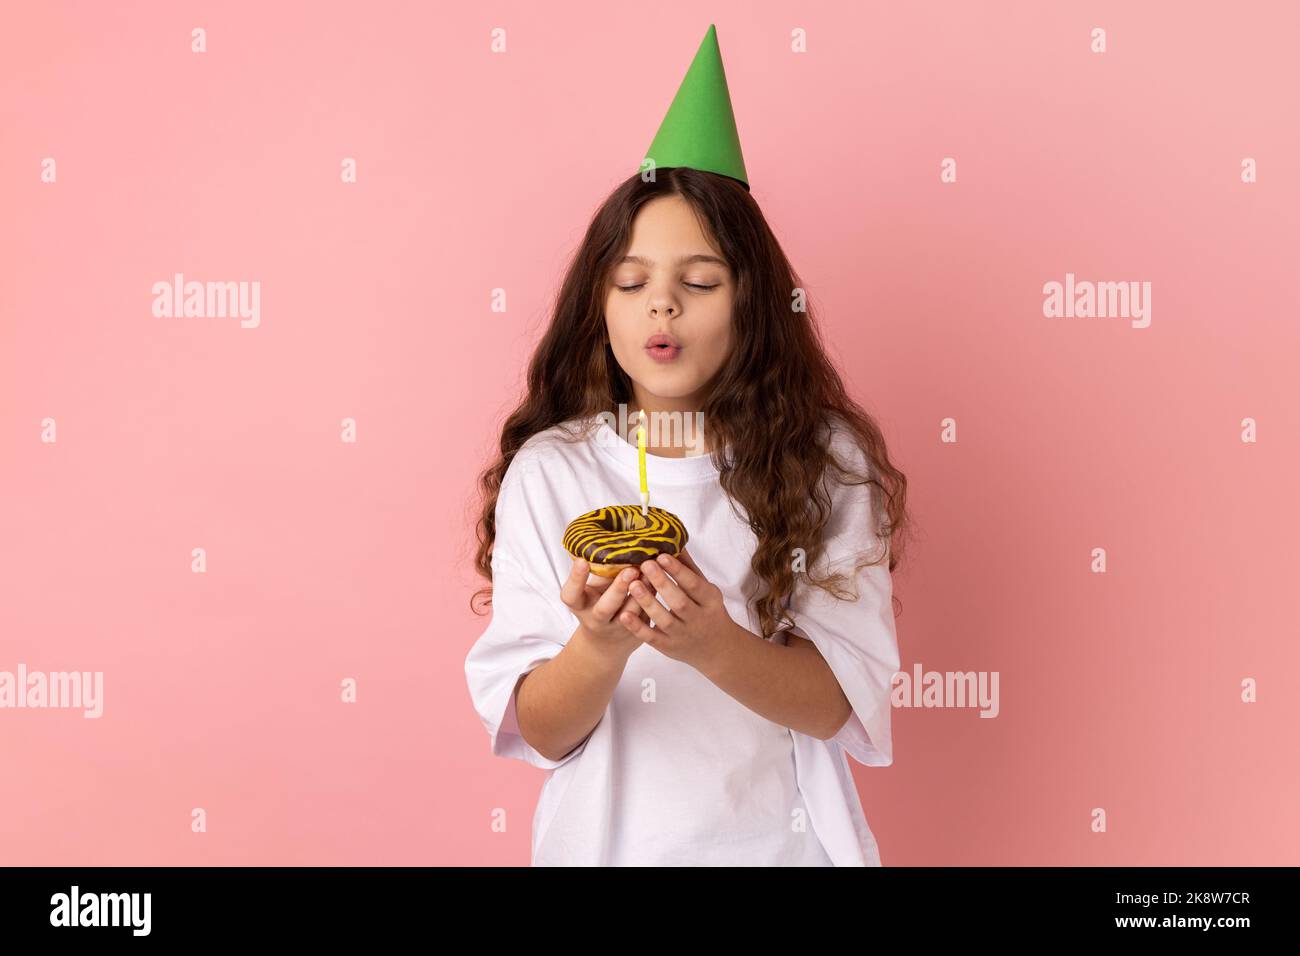 Cute charming little girl in green party cone on head holding cake and blowing candle, making wish, expressing happiness, keeps eyes closed. Indoor studio shot isolated on pink background. Stock Photo